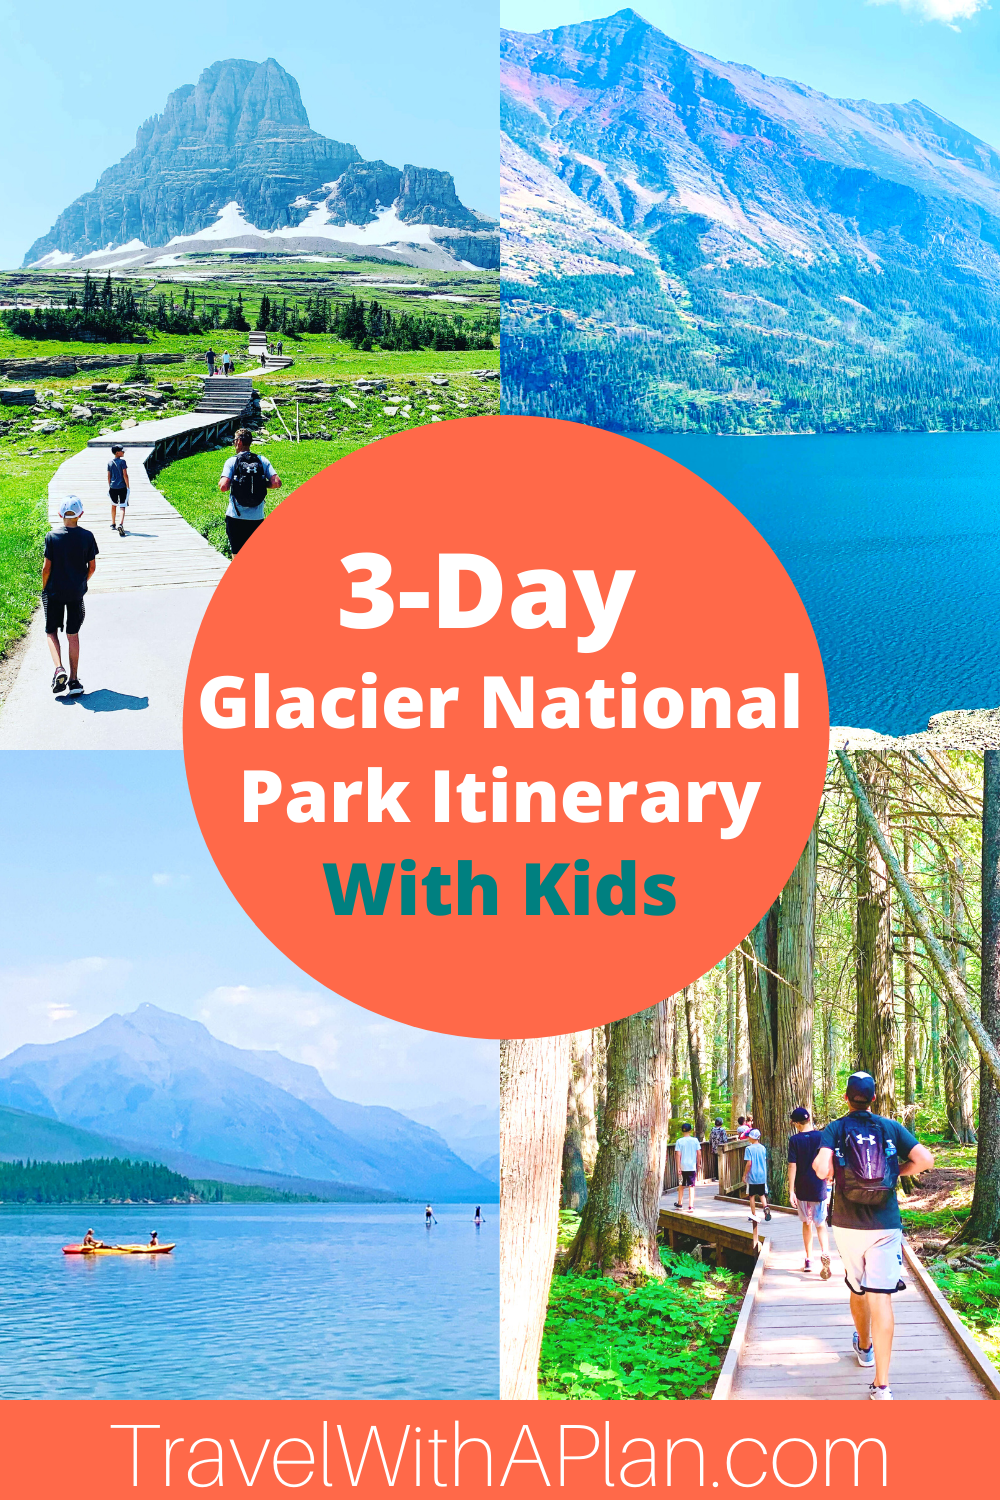 Click here for an awesome 3-day Glacier National Park itinerary with kids!  This just in from Top U.S. Family Travel Blog, Travel With A Plan!